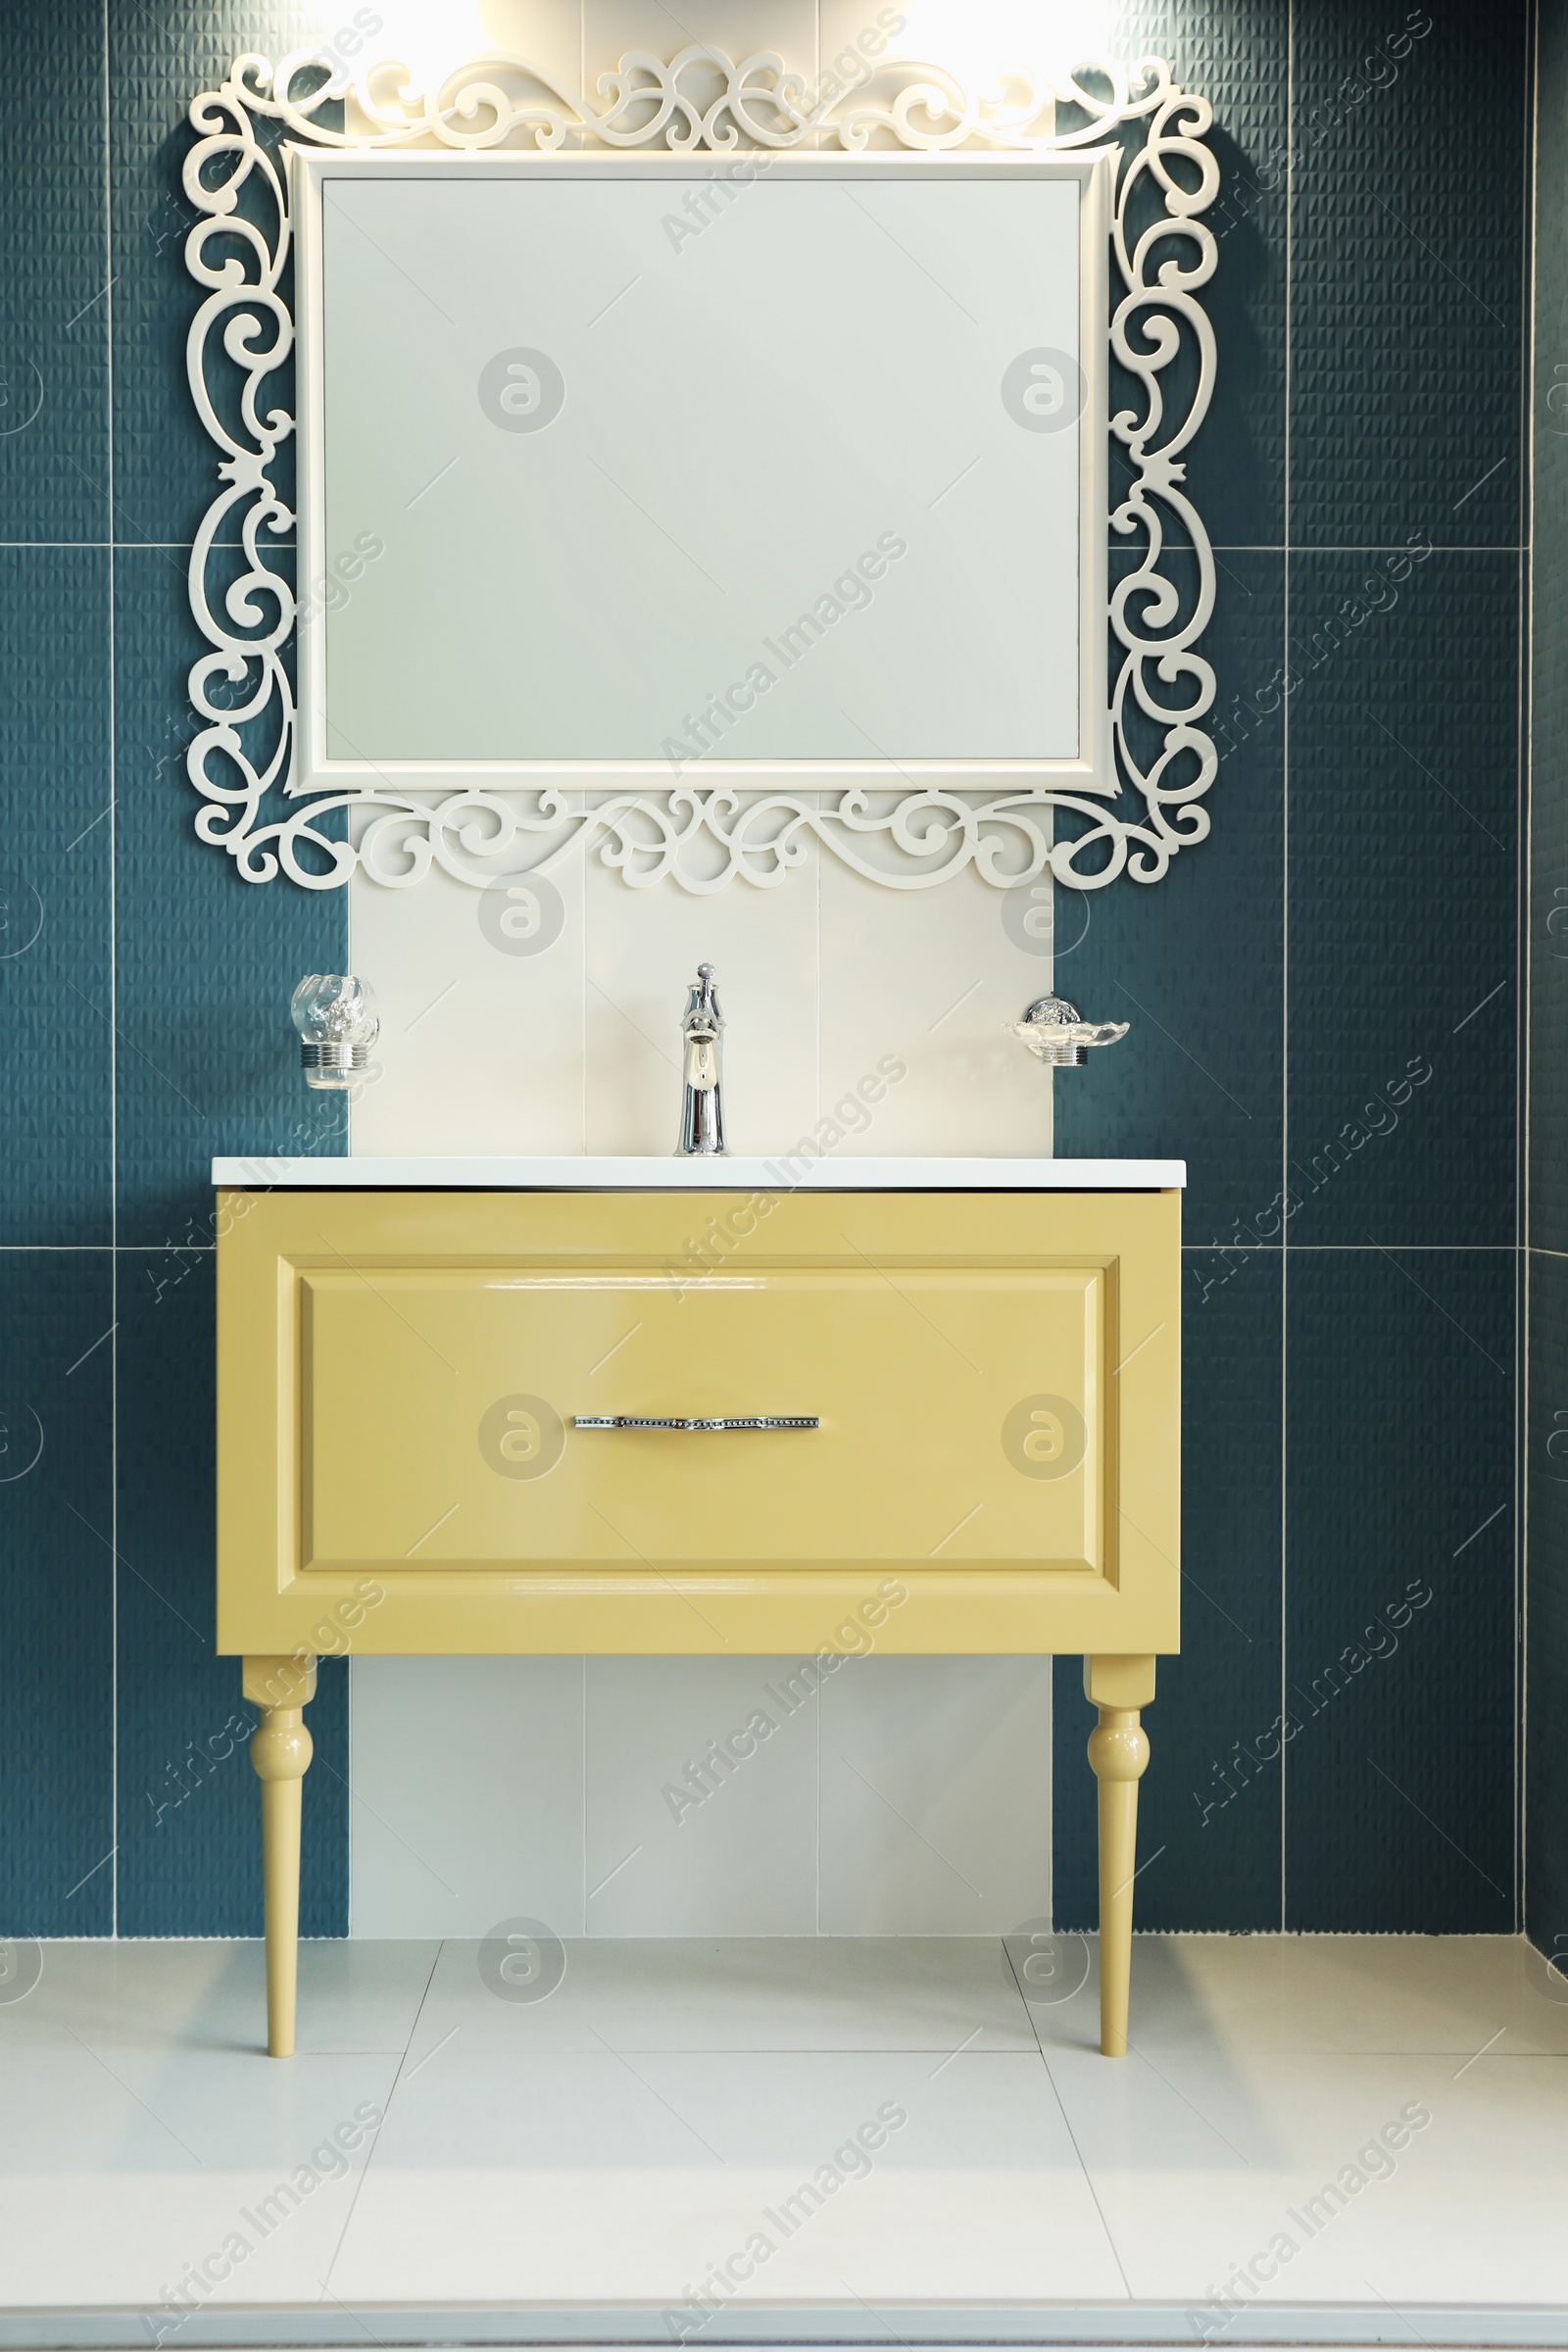 Photo of Bathroom interior with mirror and vanity unit on display in store